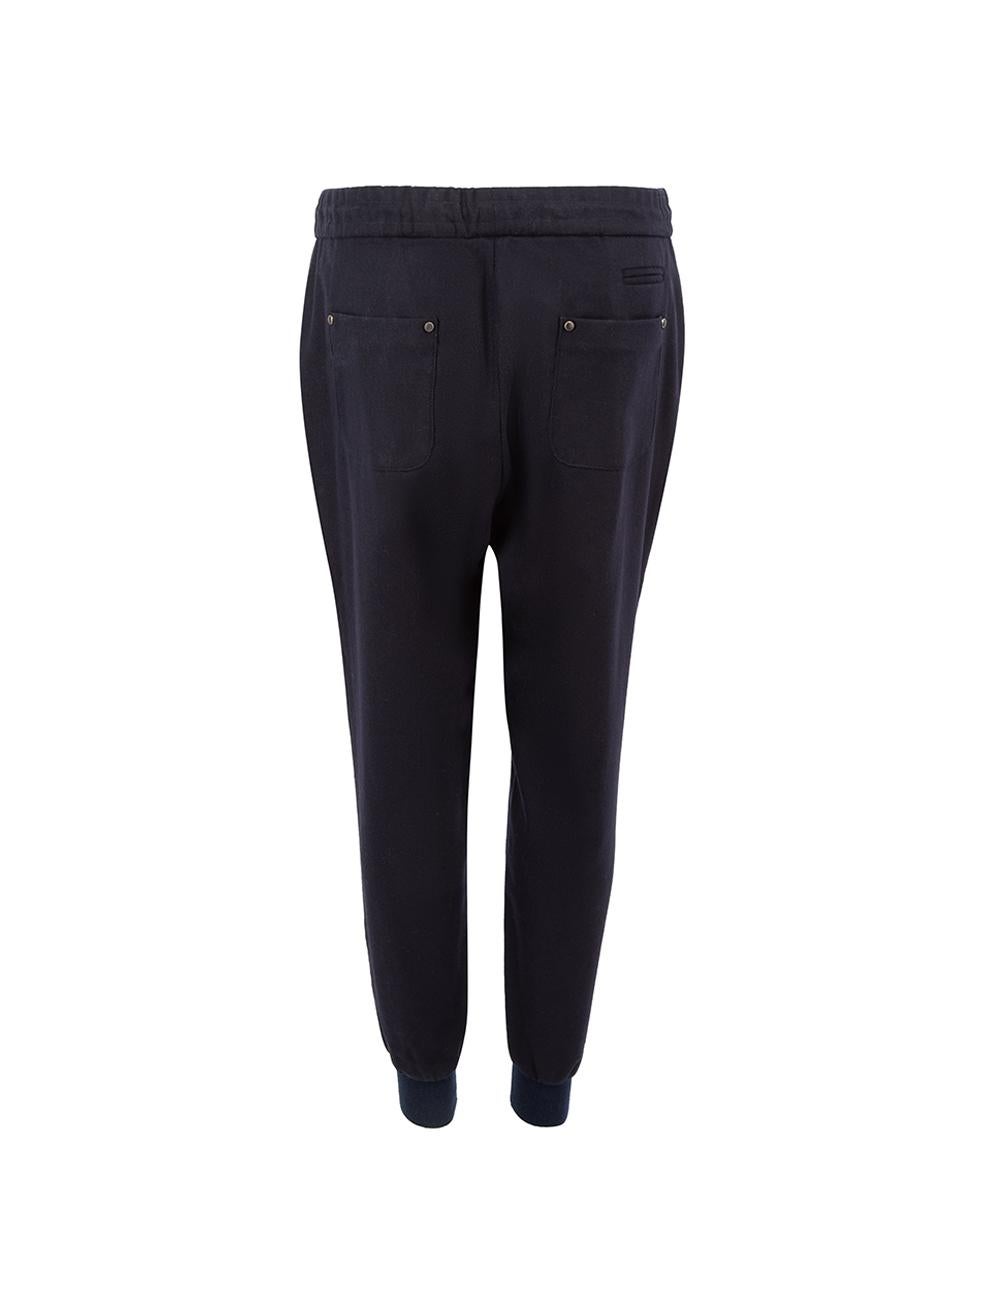 Fabiana Filippi Navy Blue Wool Jogging Trousers Size M In Good Condition For Sale In London, GB